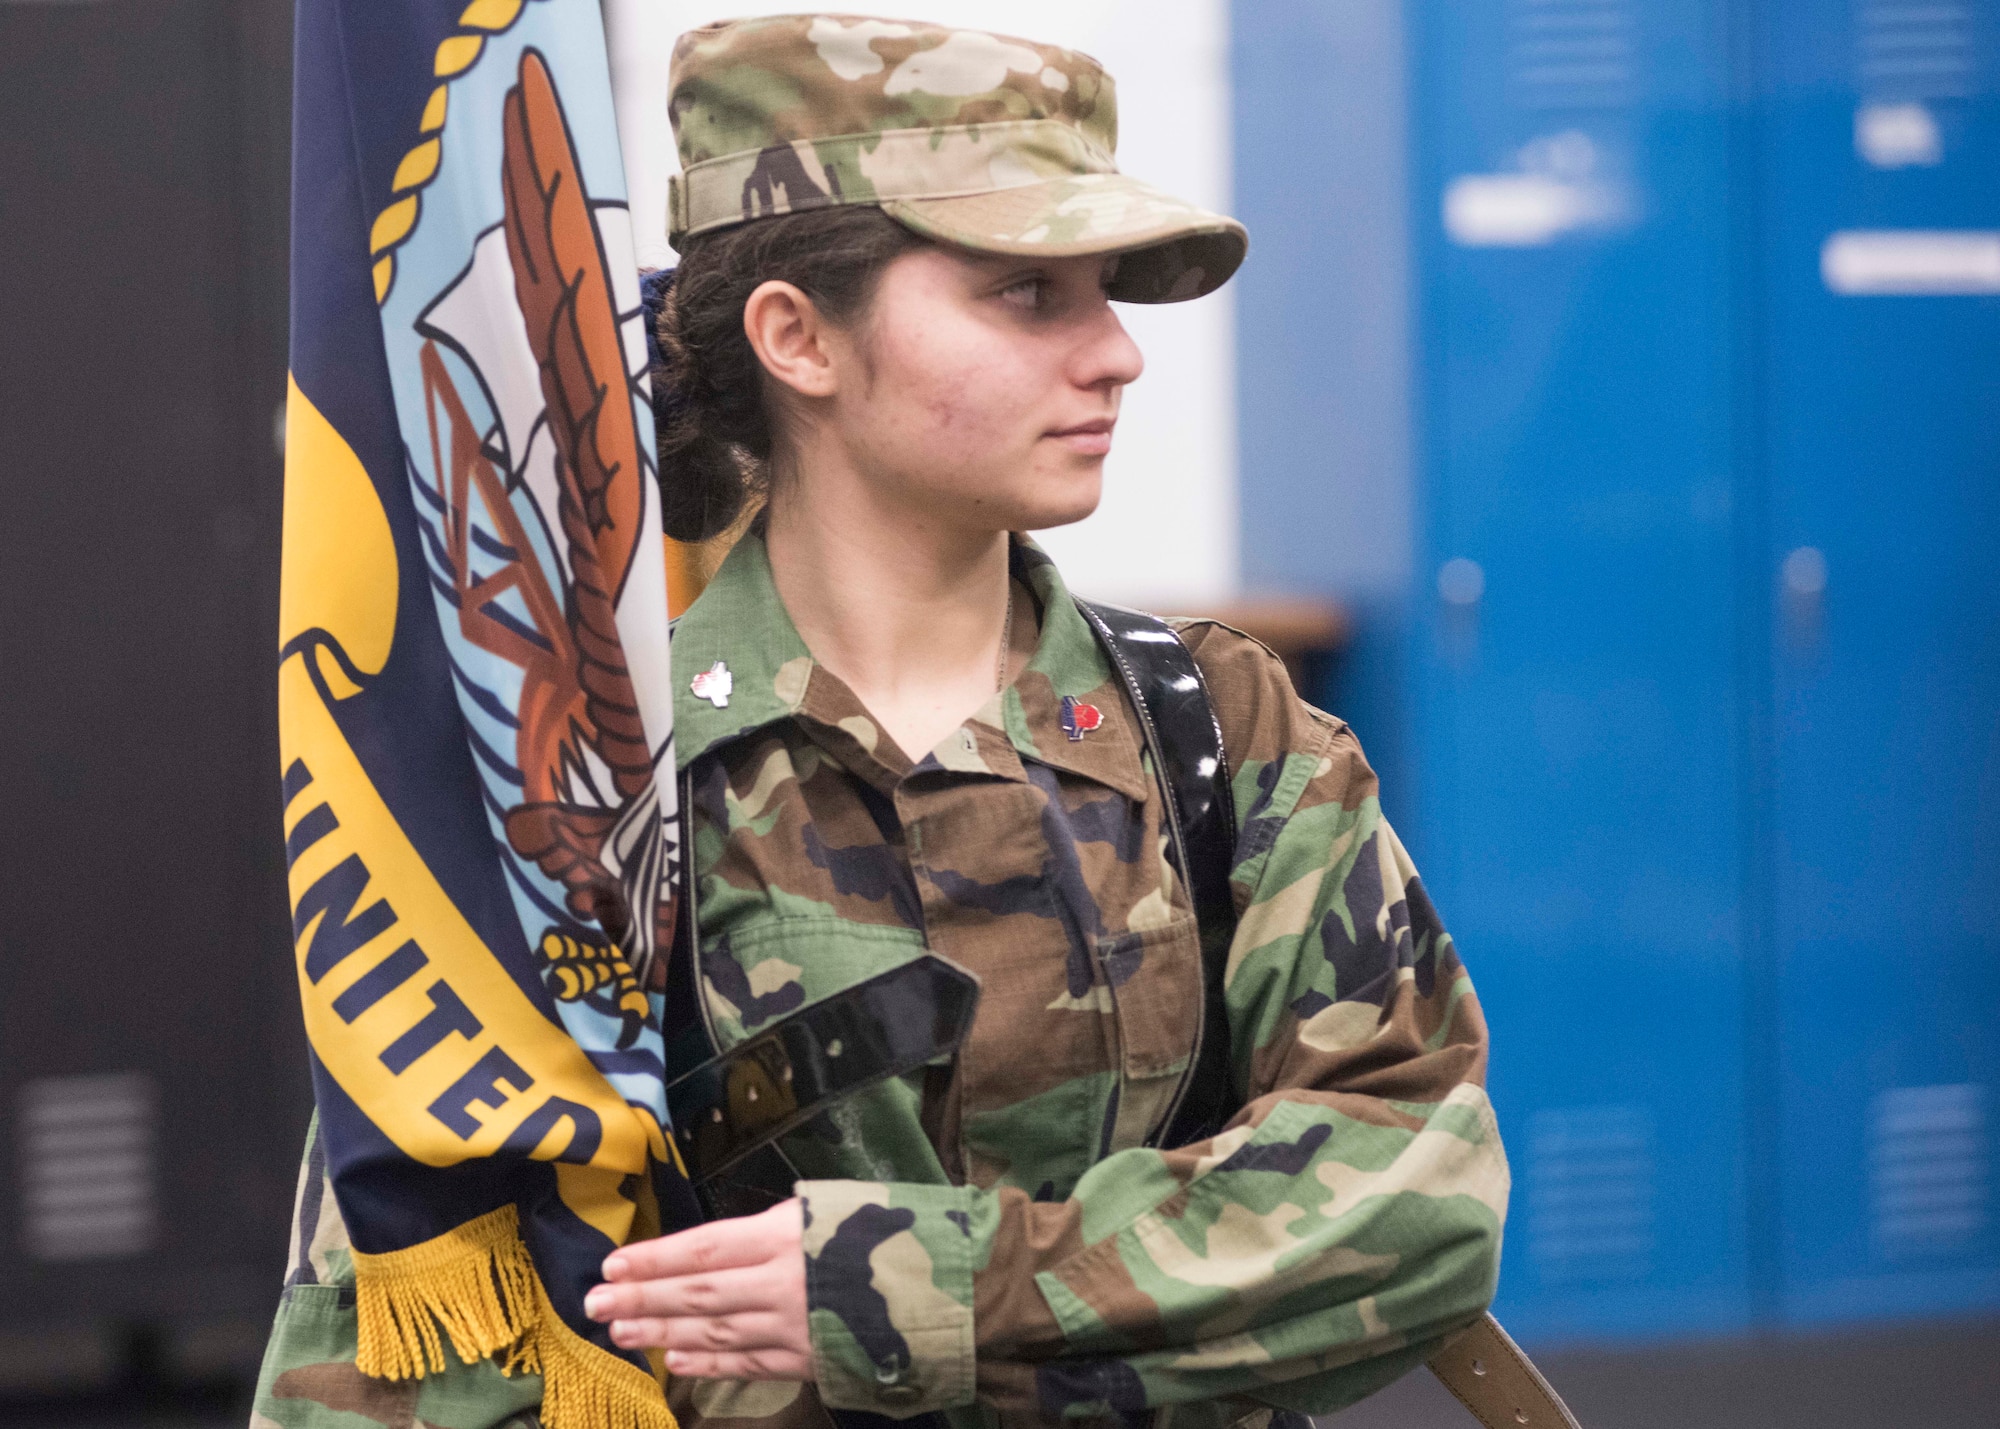 Sherry Horner, Civil Air Patrol Spokane Composite Squadron cadet, holds a ceremonial flag while practicing "presenting colors" with Honor Guardsmen at Fairchild Air Force Base, Washington, Nov. 26, 2018. CAP cadets are volunteers from ages 12-20 that dedicate their time performing duties similar to the National Guard during after-school and summer camp-style programs. (U.S. Air Force photo/ Senior Airman Ryan Lackey)